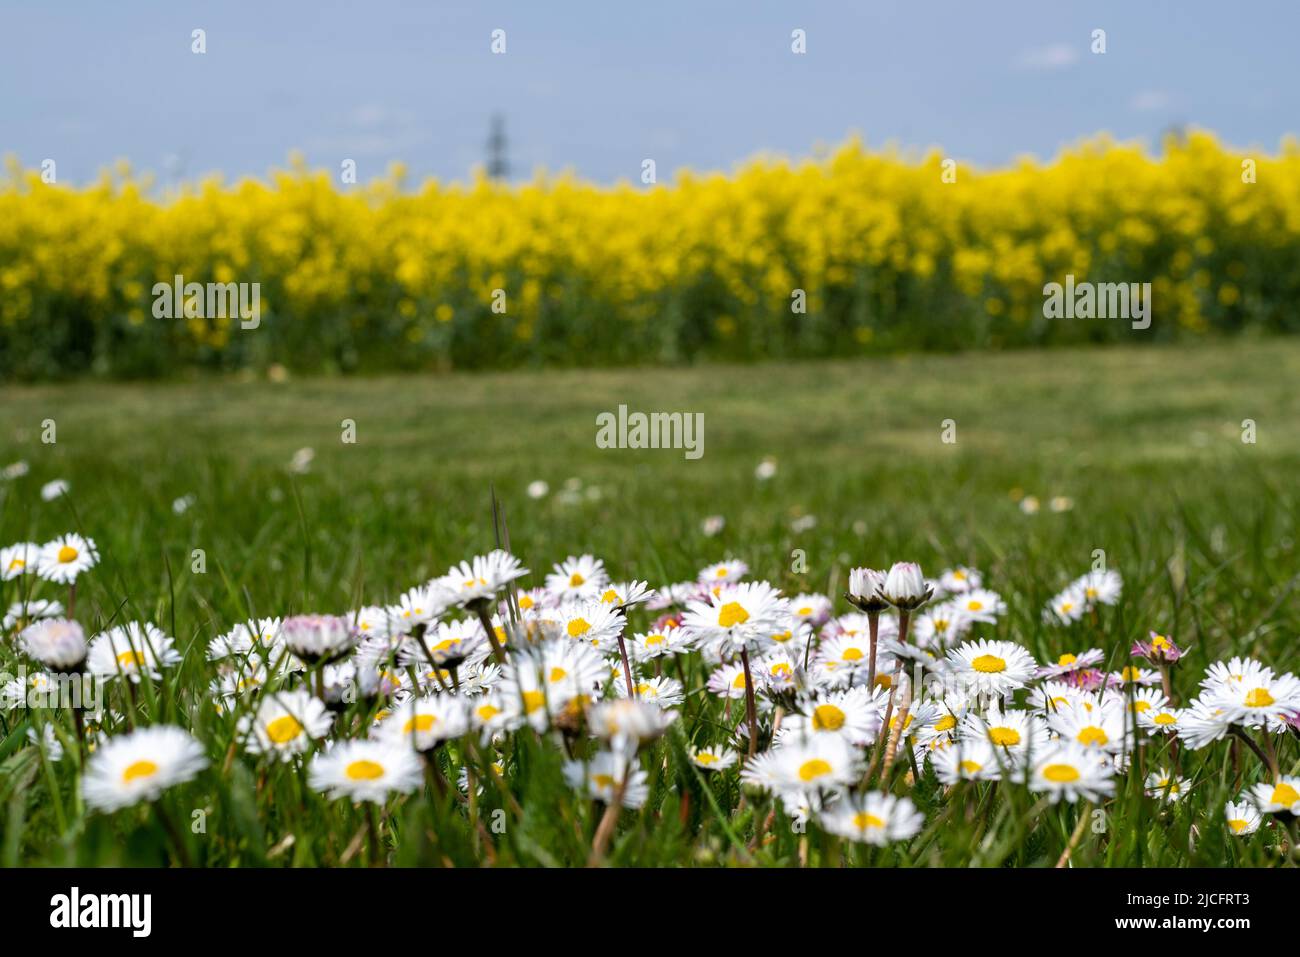 Blooming daisies, behind them a yellow canola field. Stock Photo